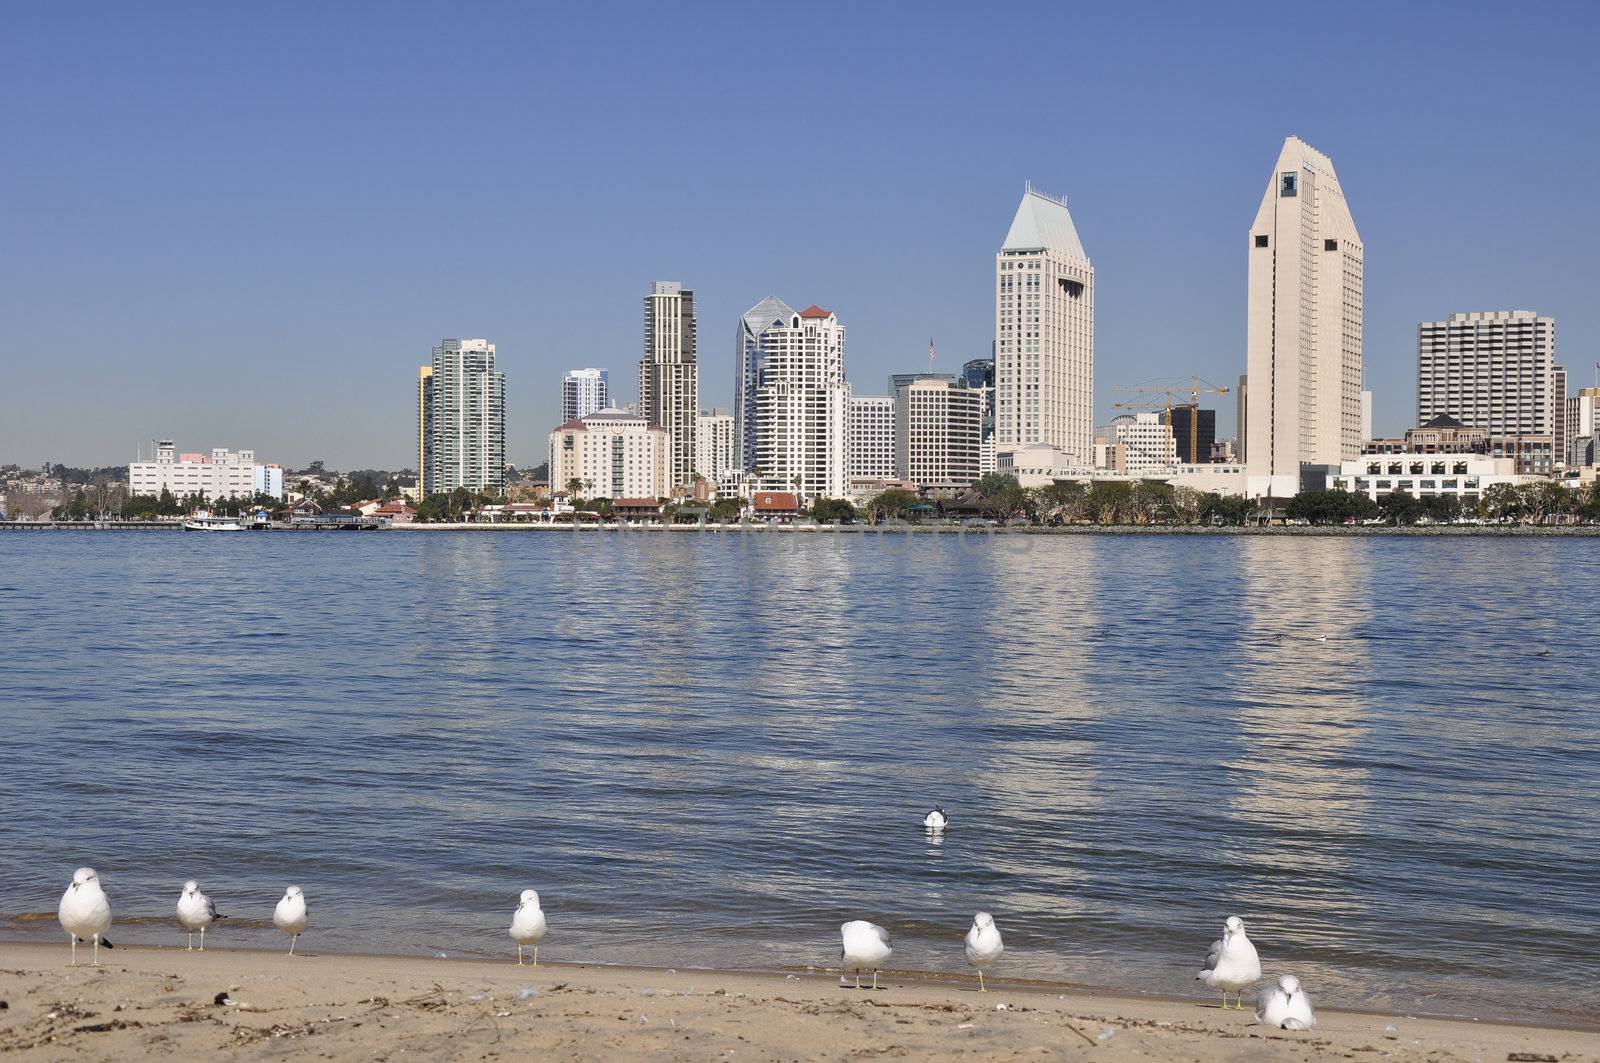 Seagulls rest on a Coronado beach across the bay from downtown San Diego in Southern California.